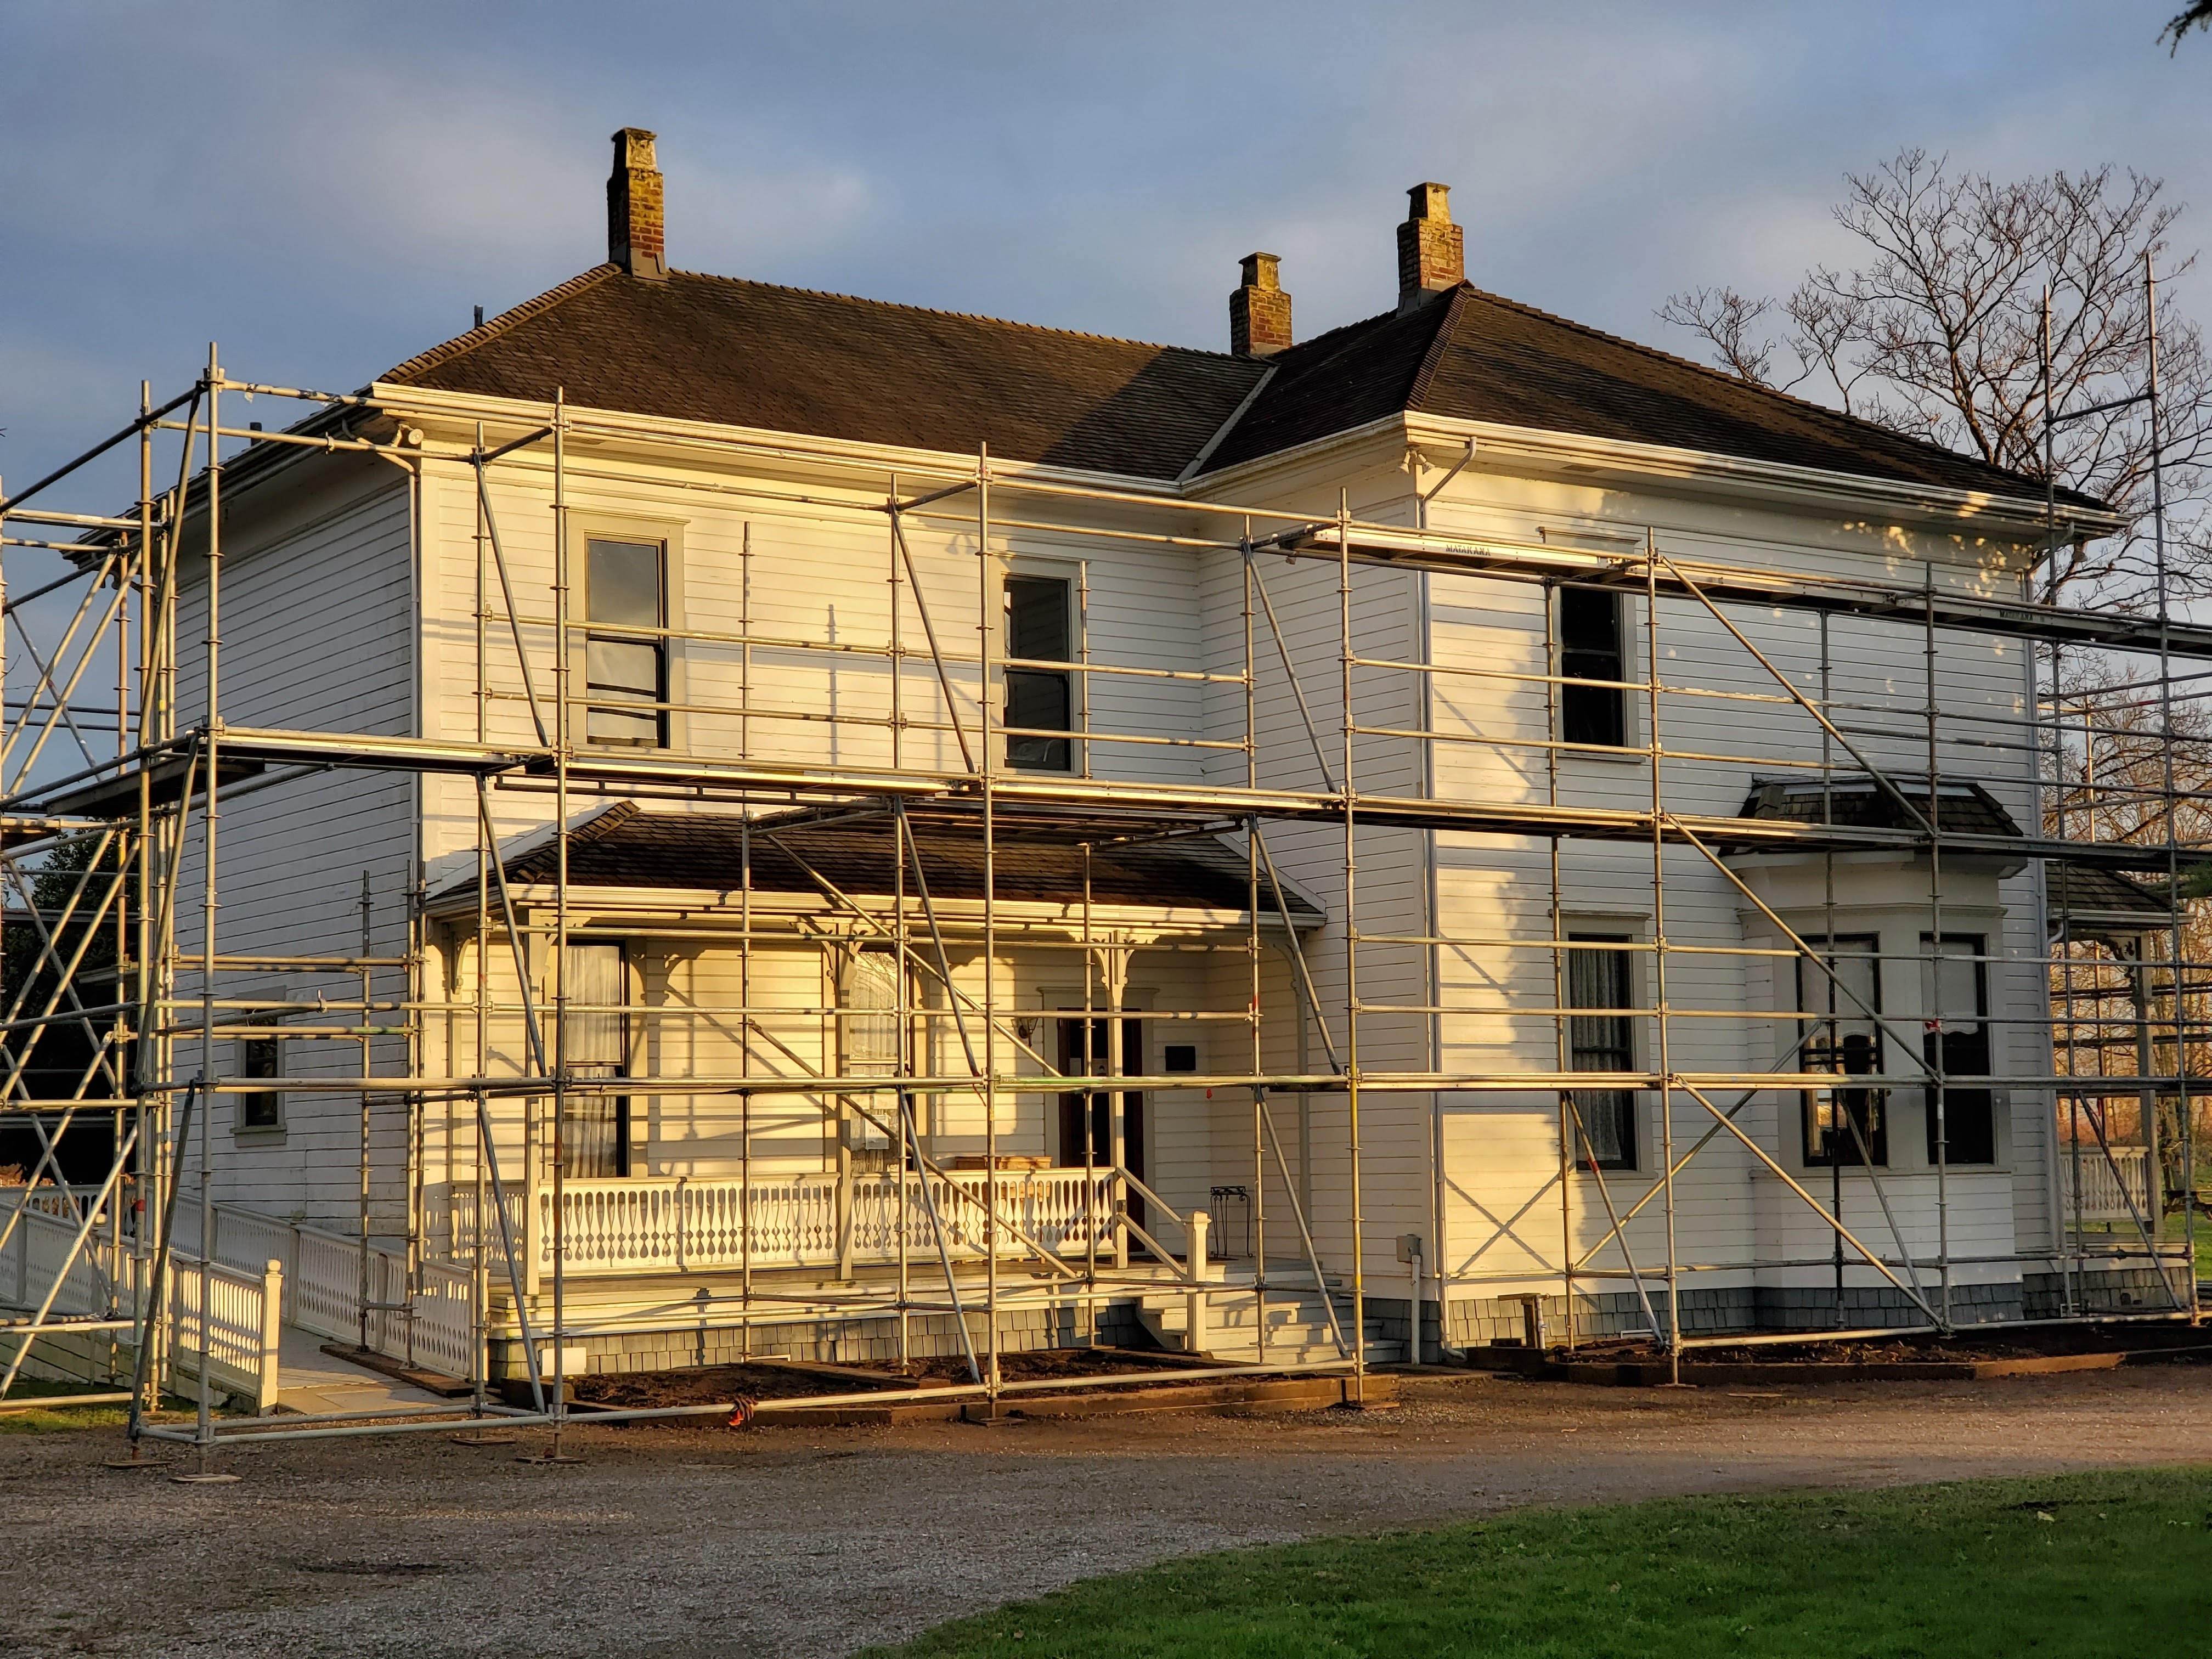 An image of a house surrounded round scaffolding